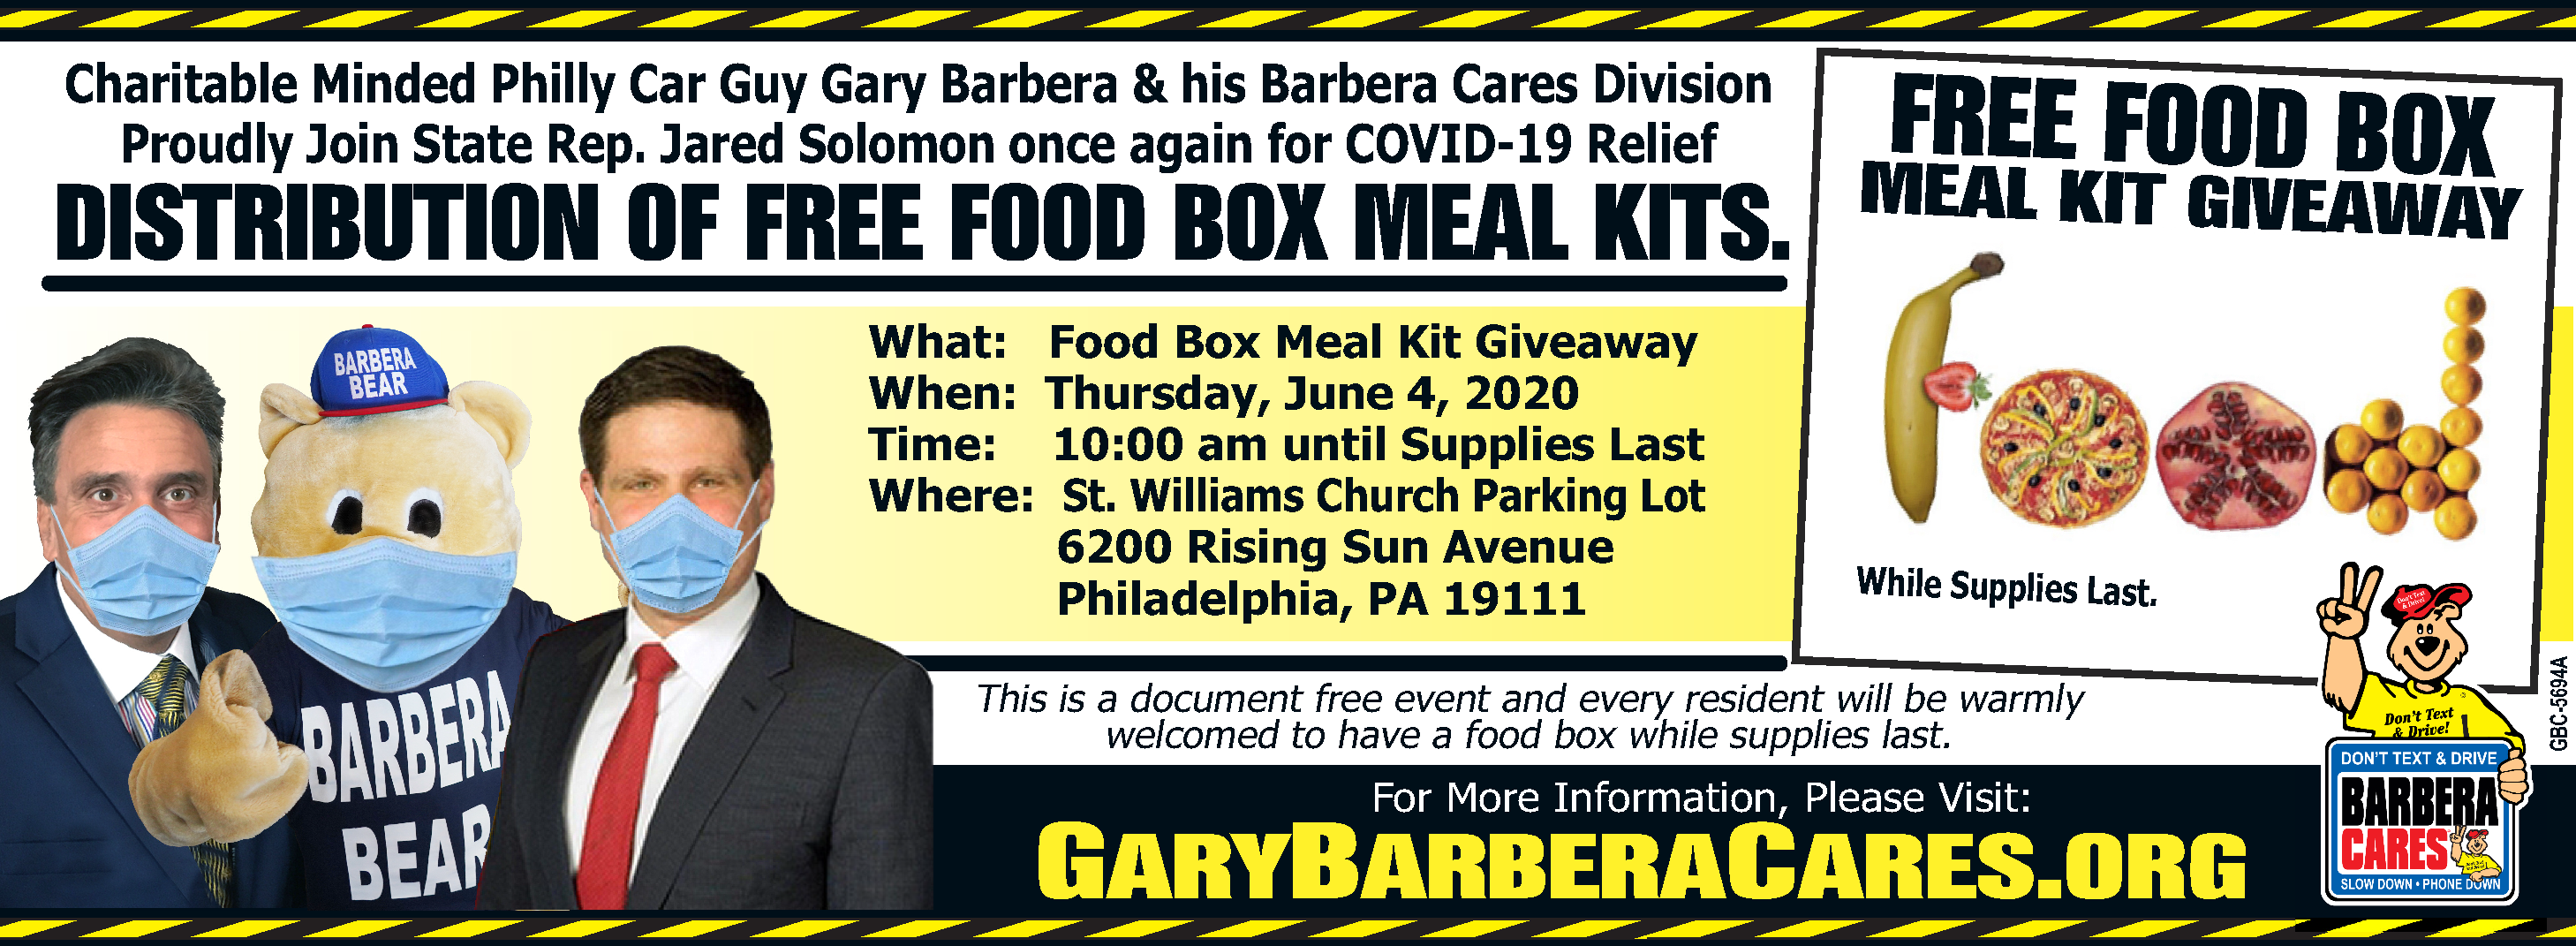 Gary Barbera, Barbera Cares join State Rep. Jared Solomon and the Share Food Program for COVID-19 Relief; Distribution of Free Food Box Meal Kits Tour in Lawncrest Northeast Philadlephia